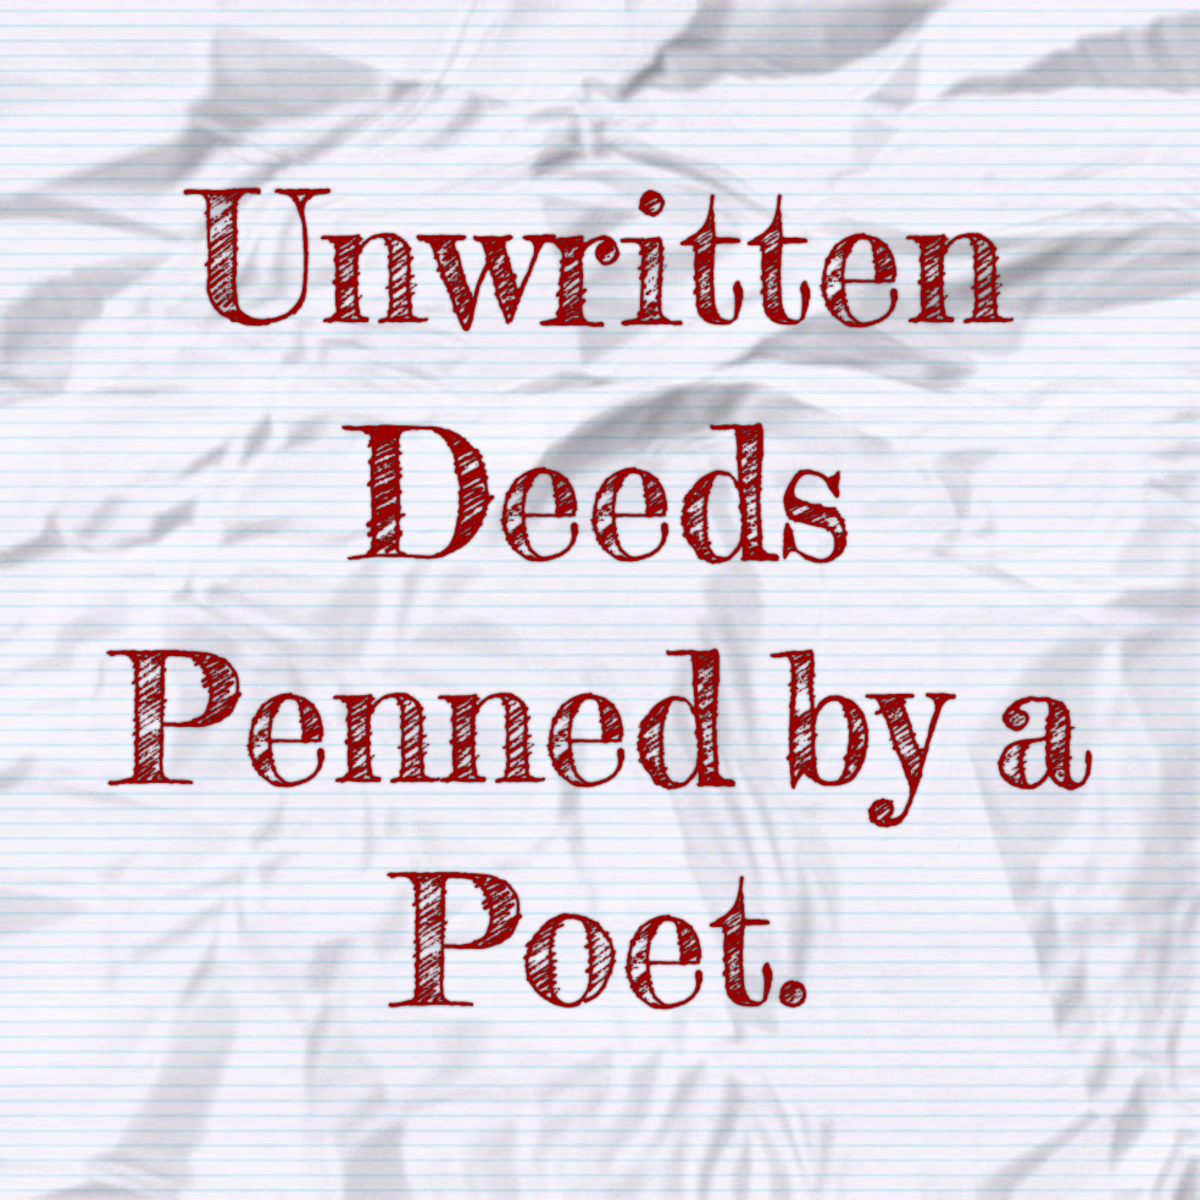 Unwritten Deeds Penned by a Poet.